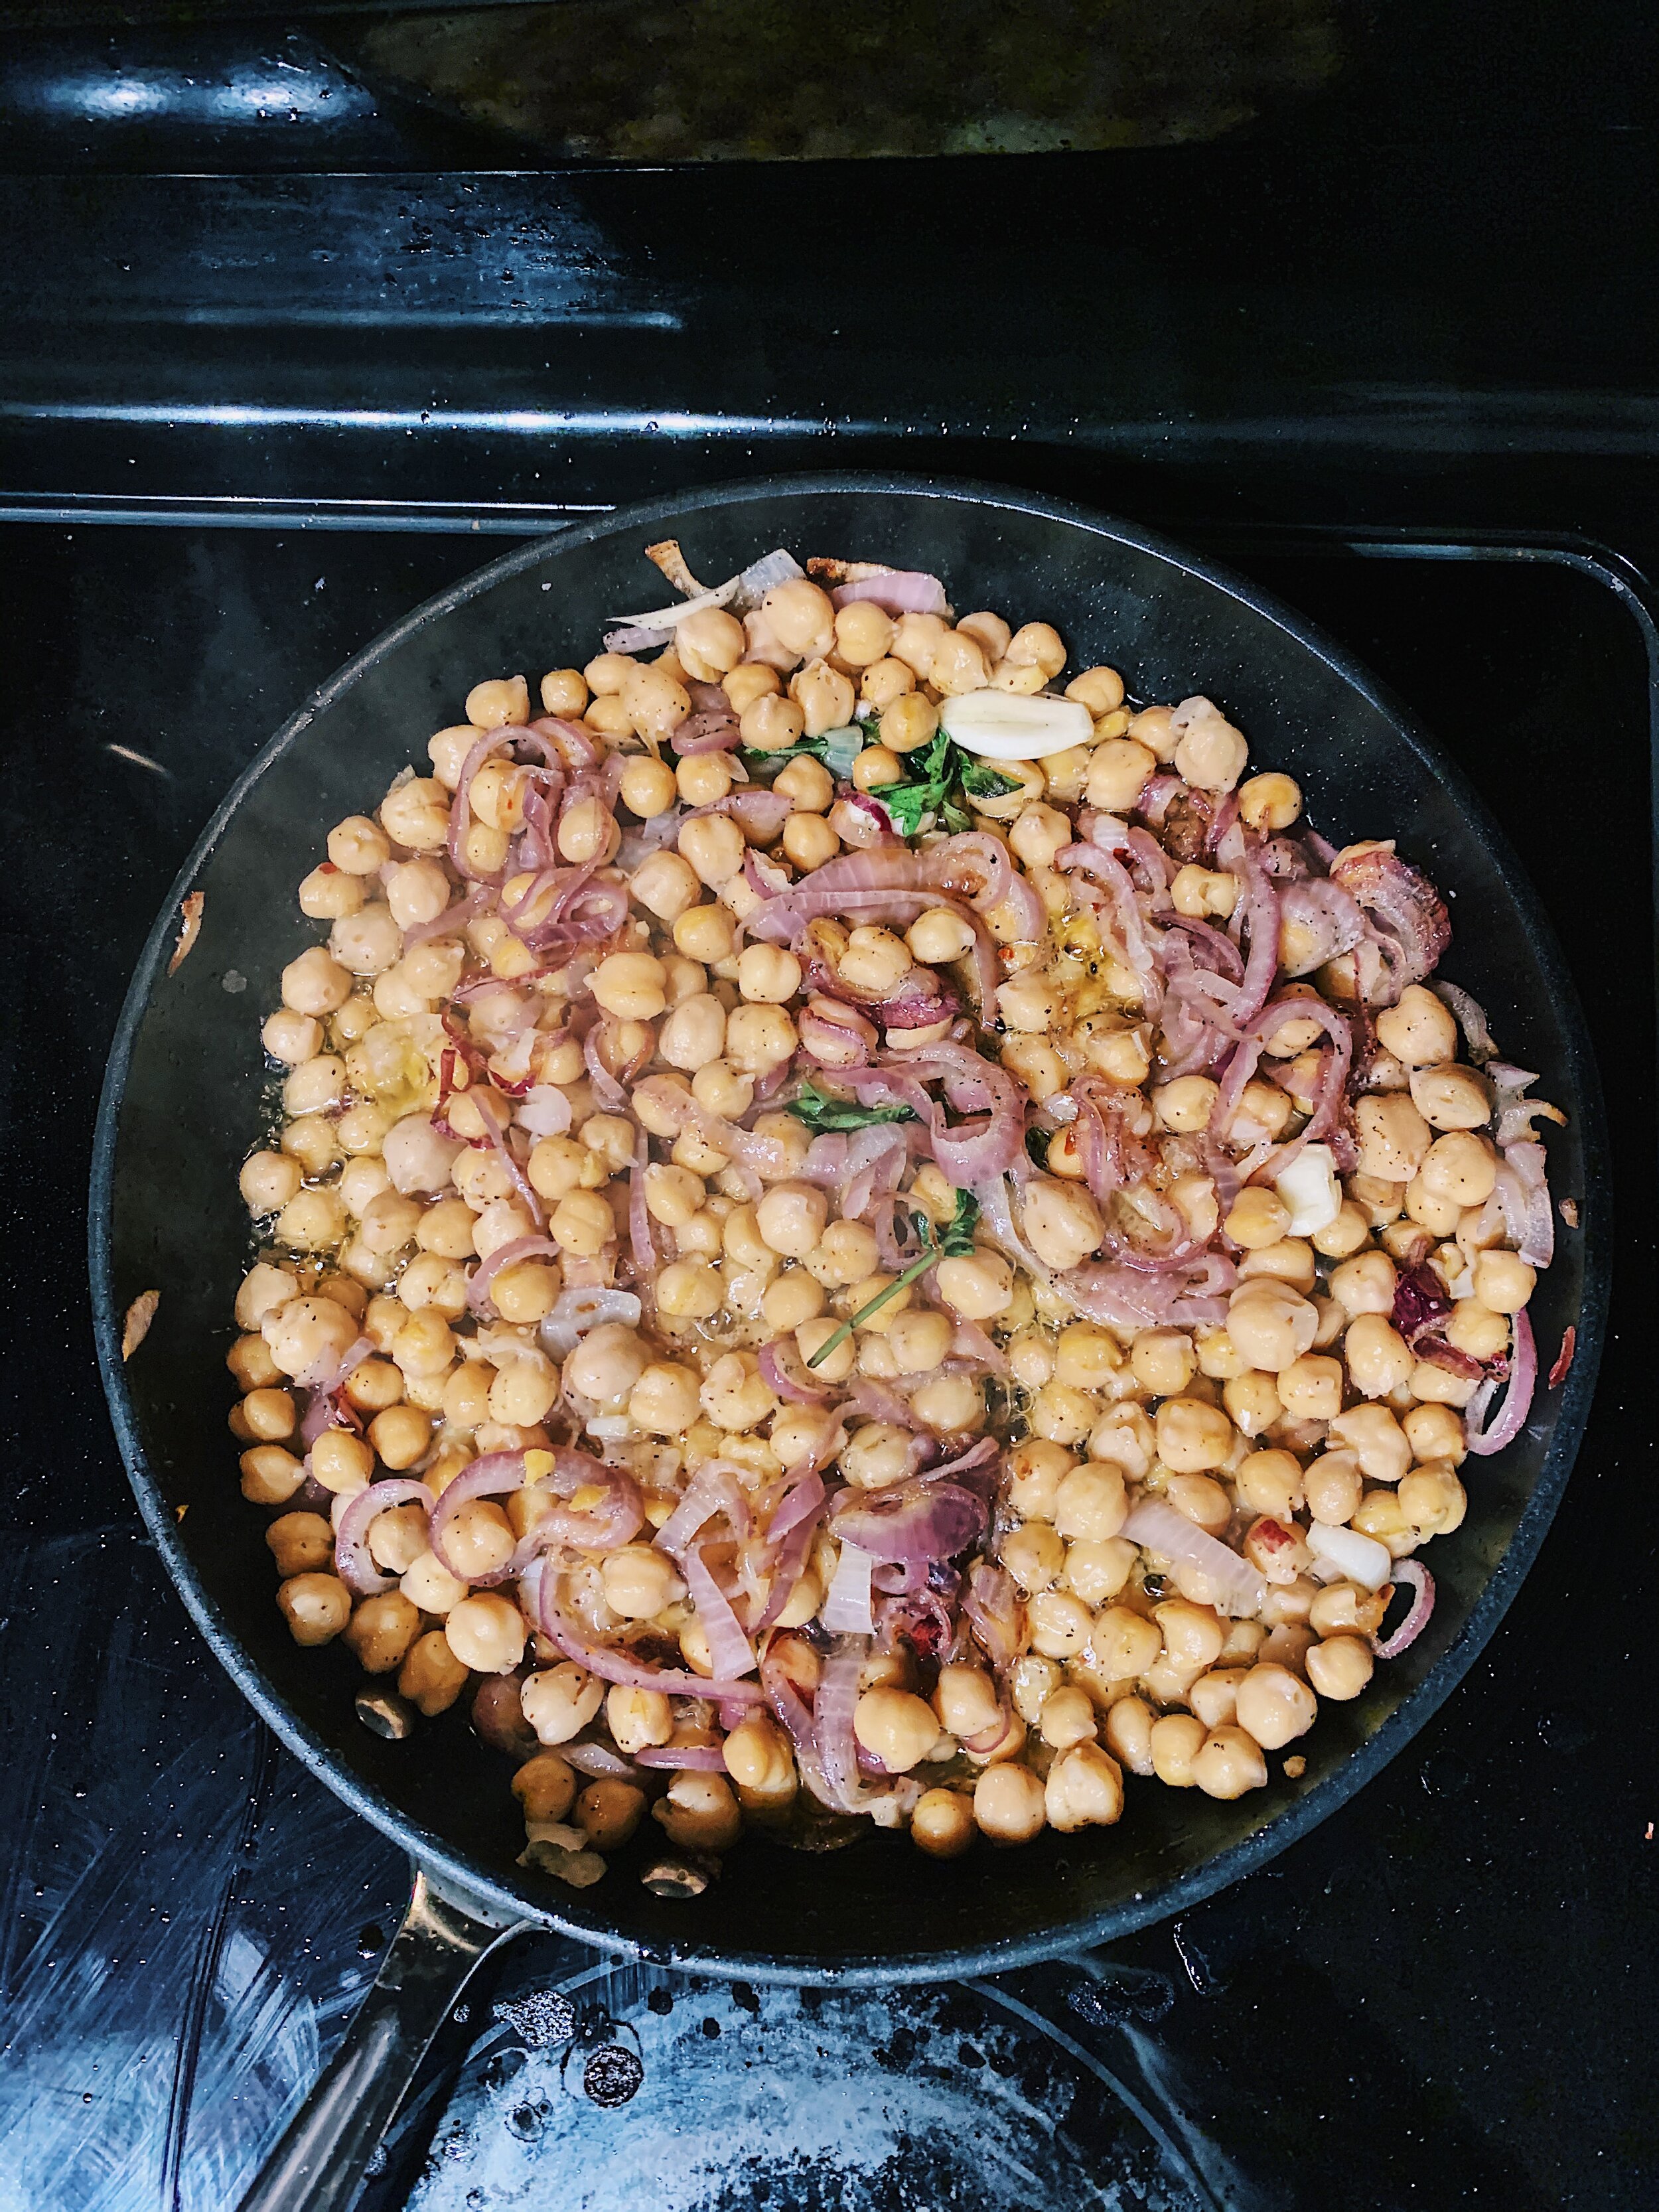 frizzled-chickpeas-feta-alison-roman-cooked-1.jpg